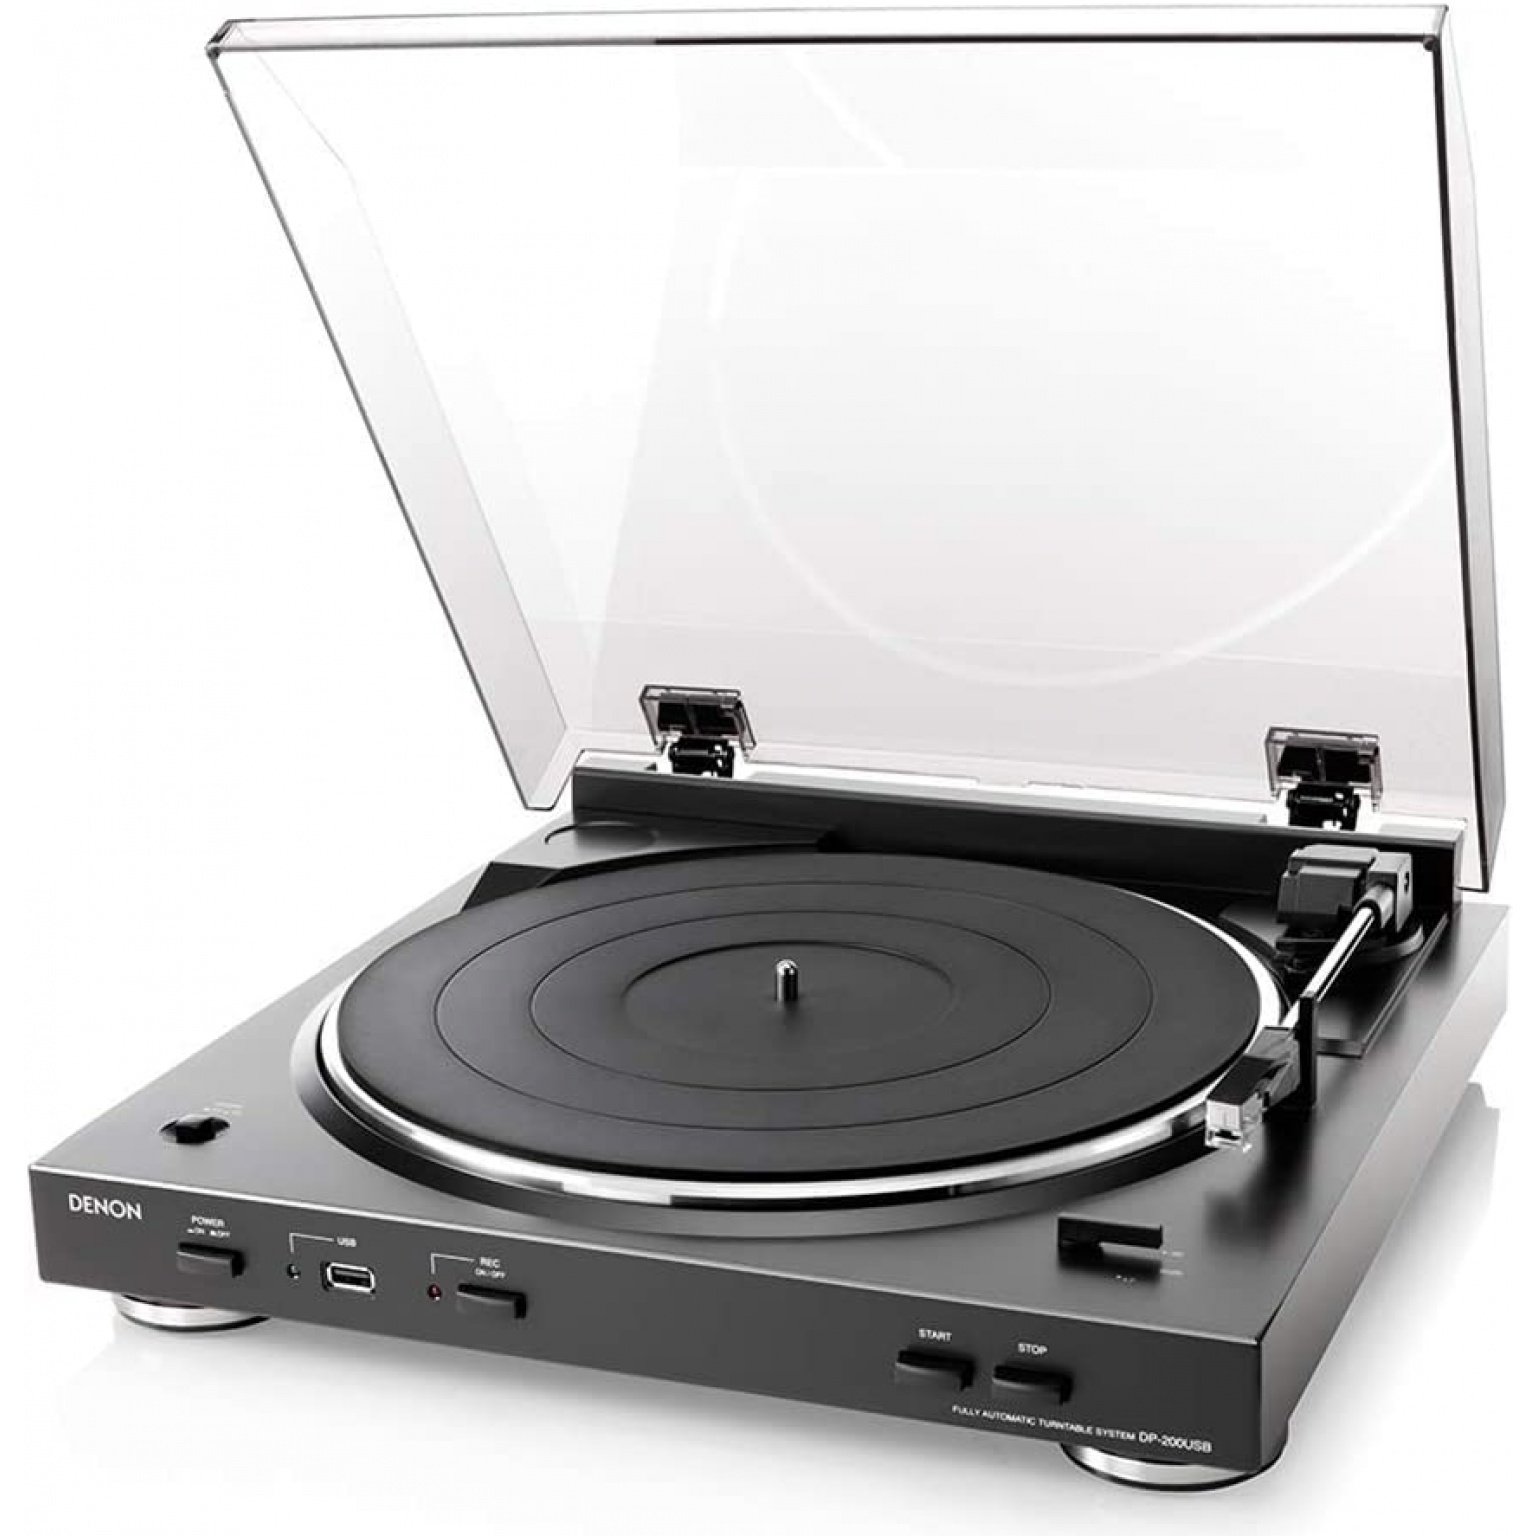 Denon DP 200 USB Fully Automatic Turntable with USB MP3 Encoder